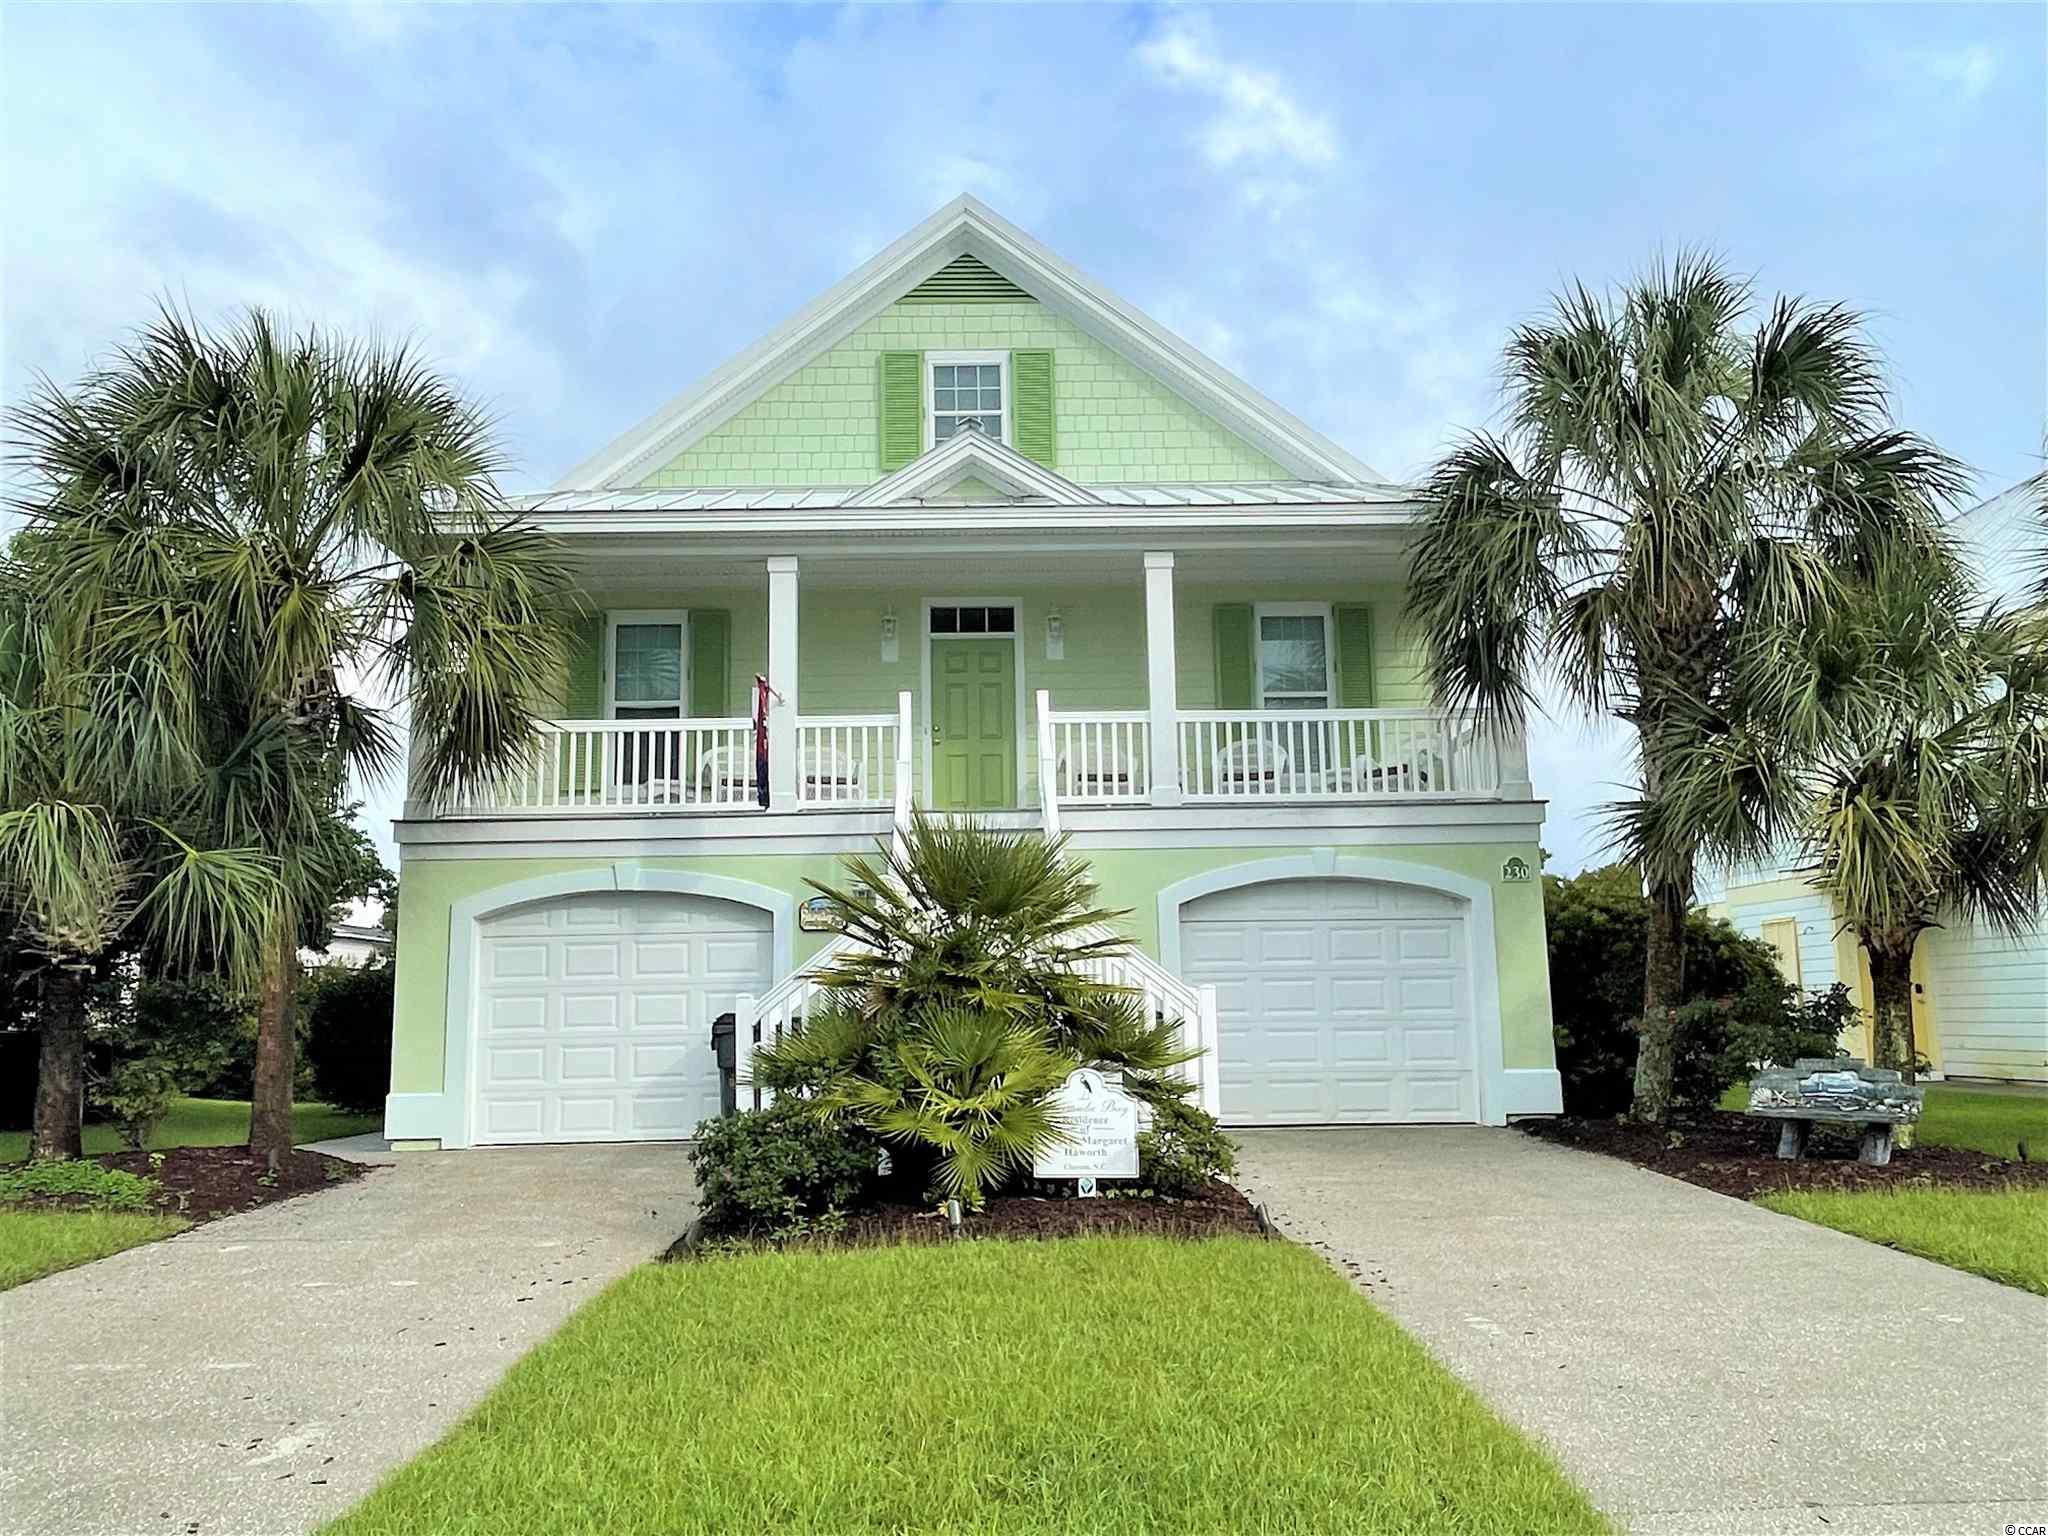 230 Georges Bay Rd. Murrells Inlet, SC 29576